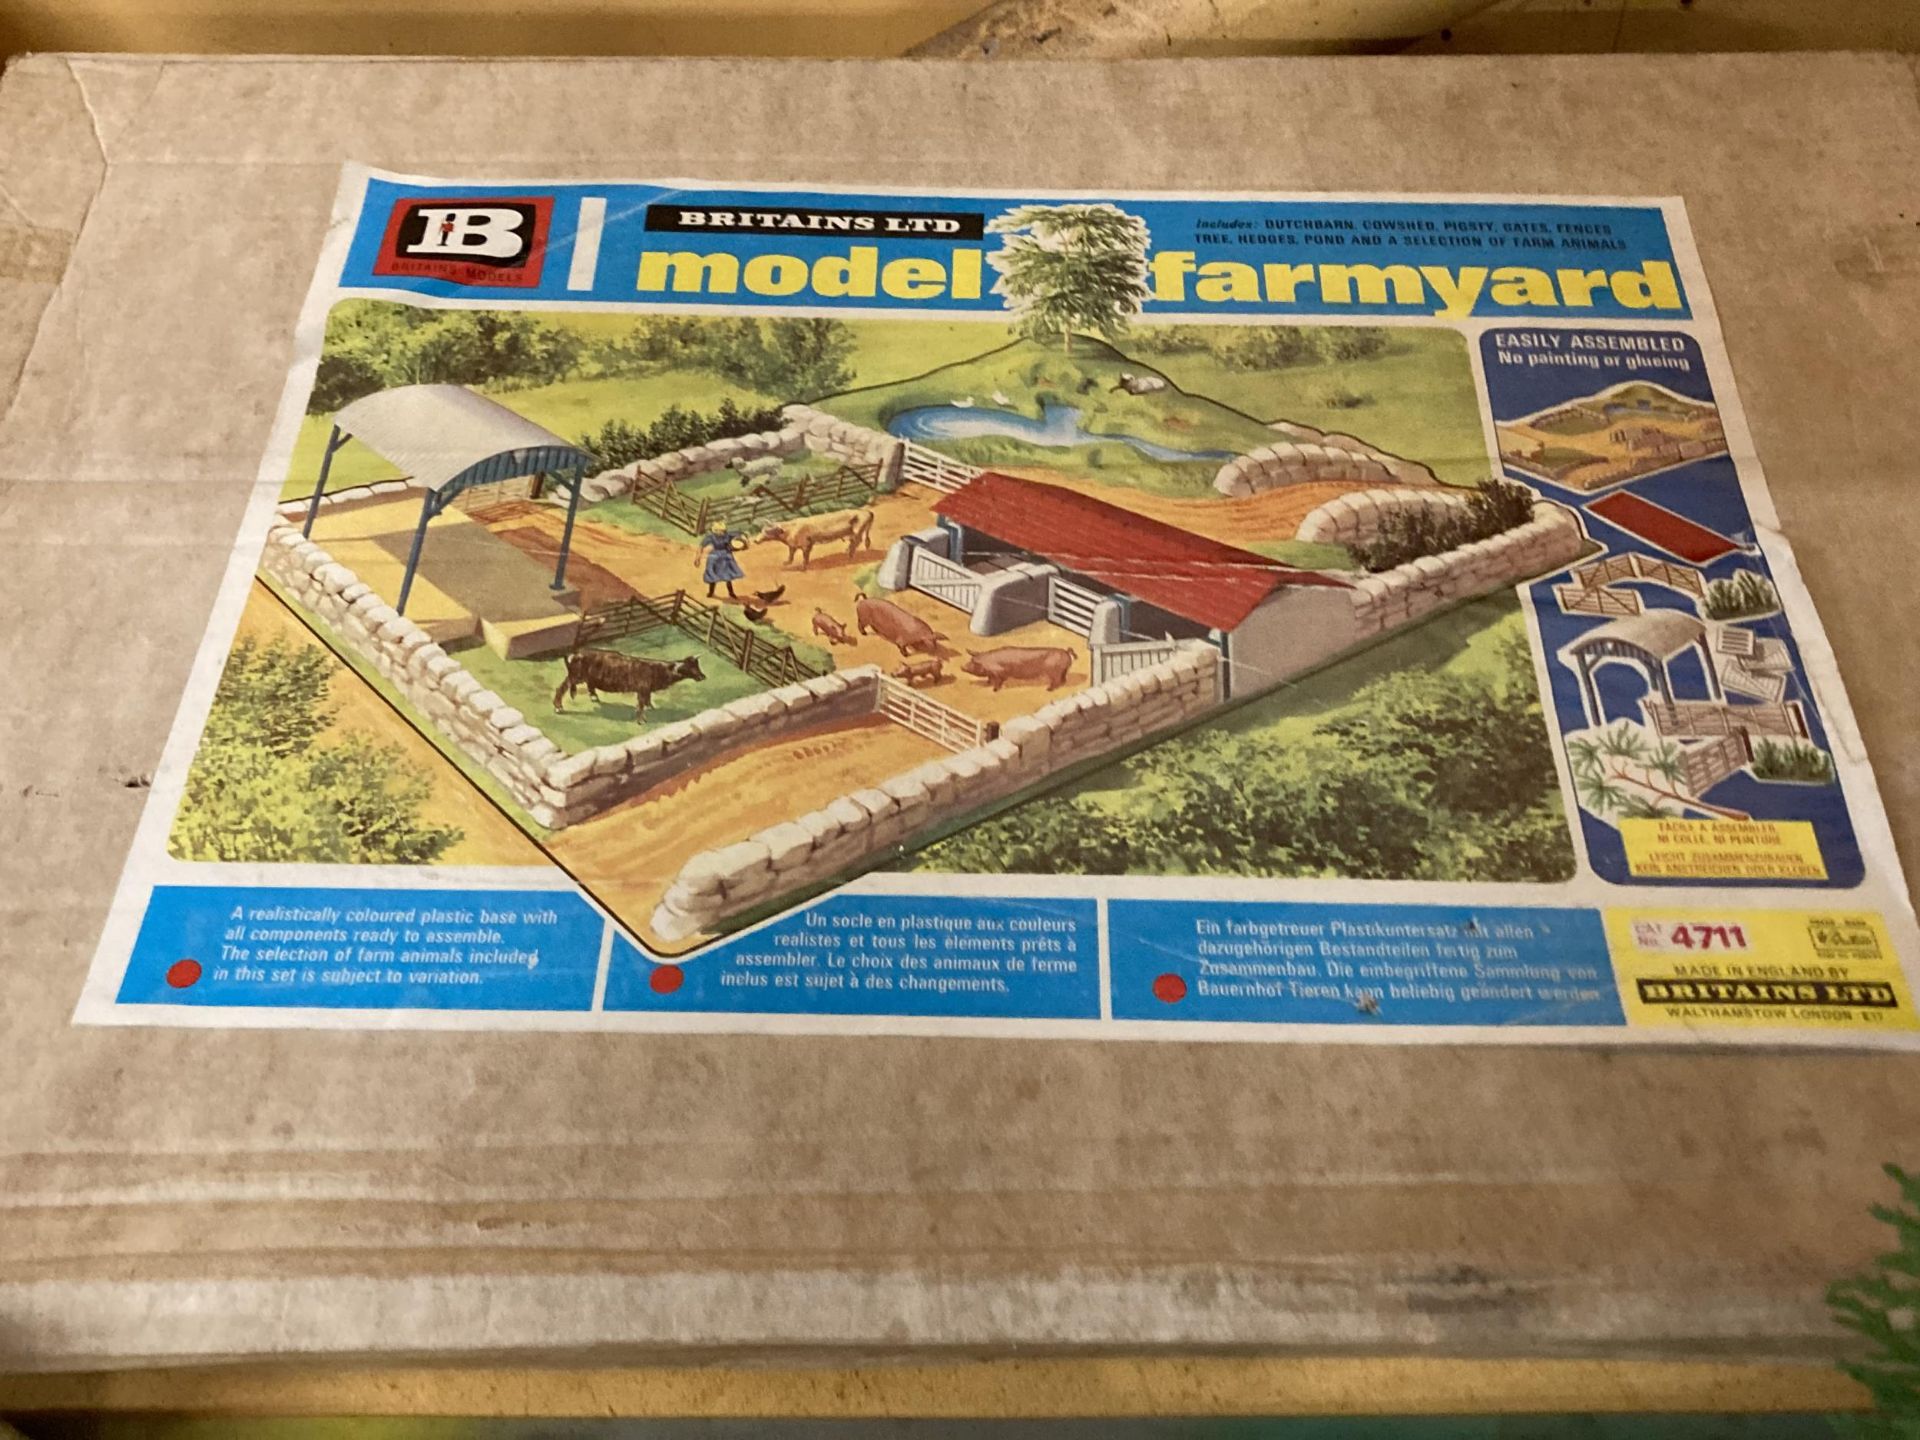 A COMPLETE ORIGINAL BRITIANS MODEL FARM YARD NO 4711 FROM THE LATE 1970'S WITH ORIGINAL BOX - Image 3 of 4